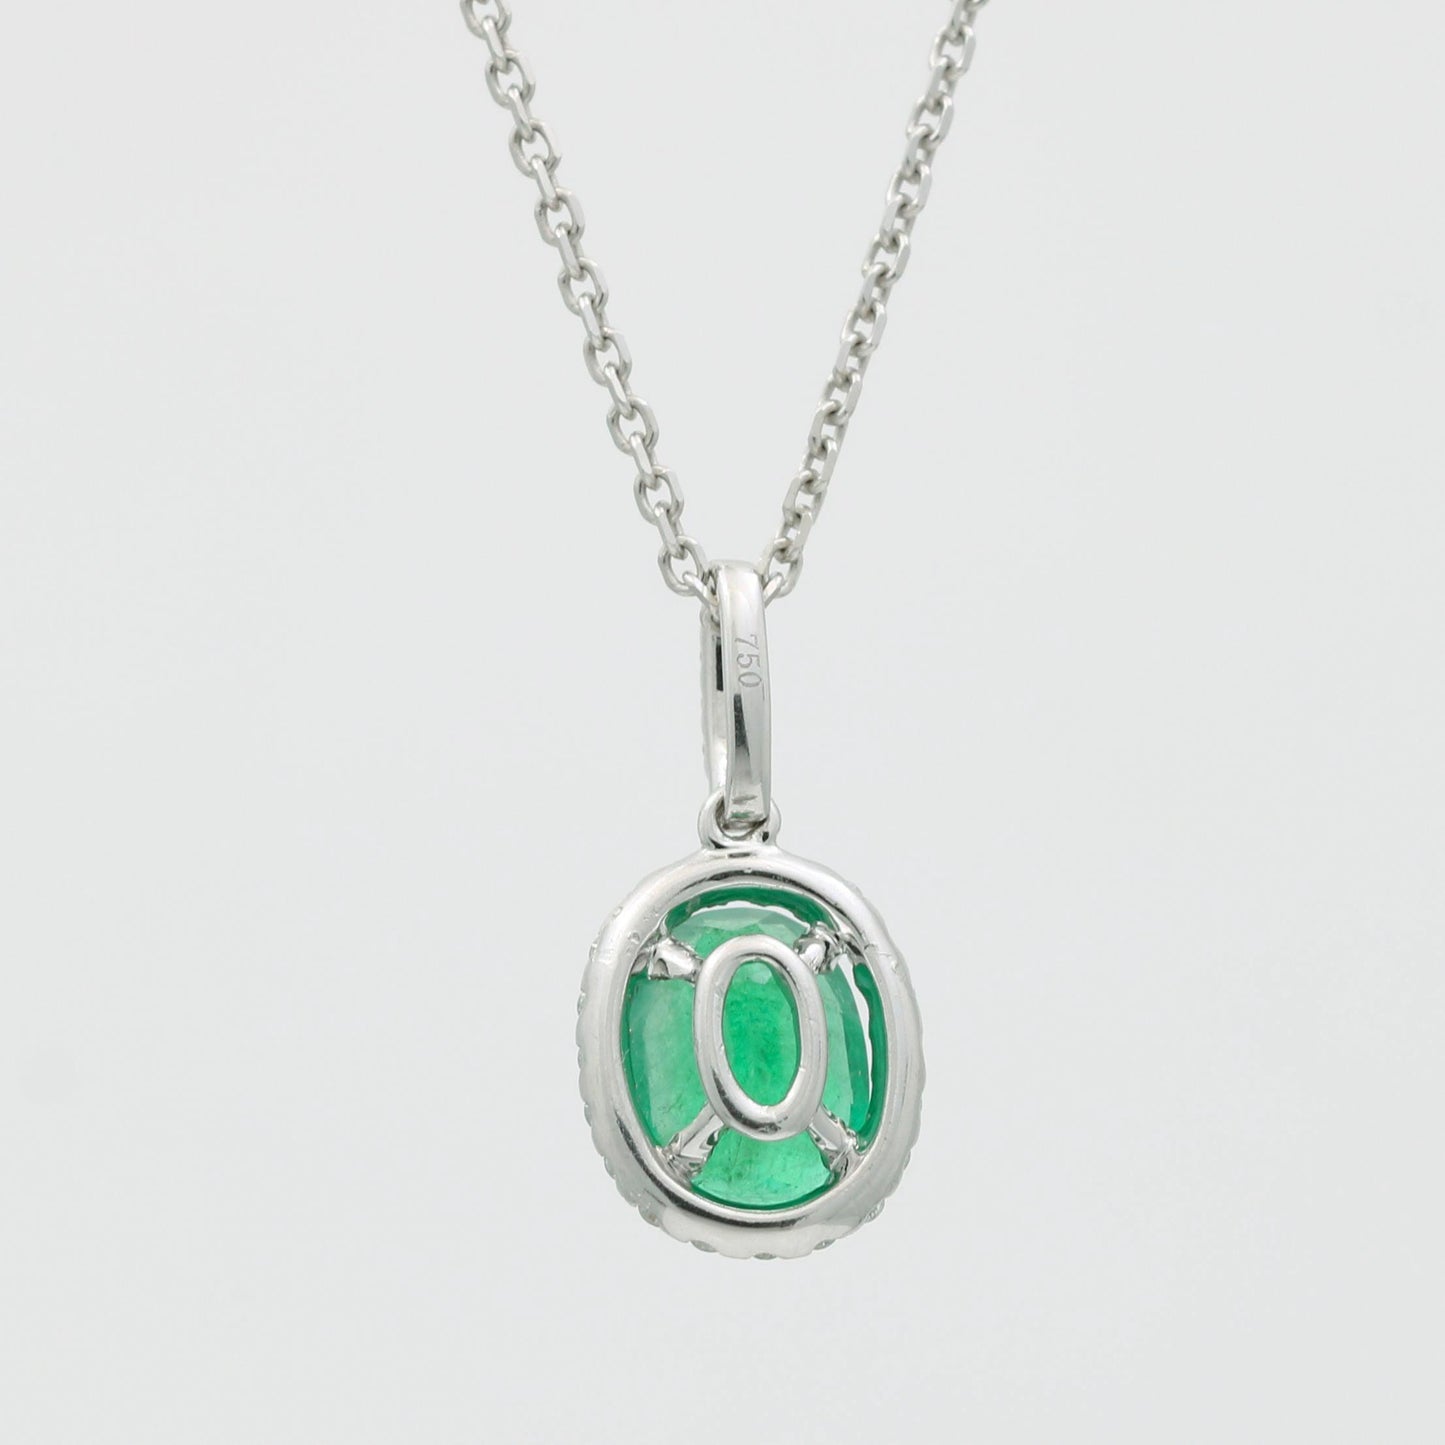 Emerald and Diamond Pendant Necklace in 18k White Gold - 31 Jewels Inc.